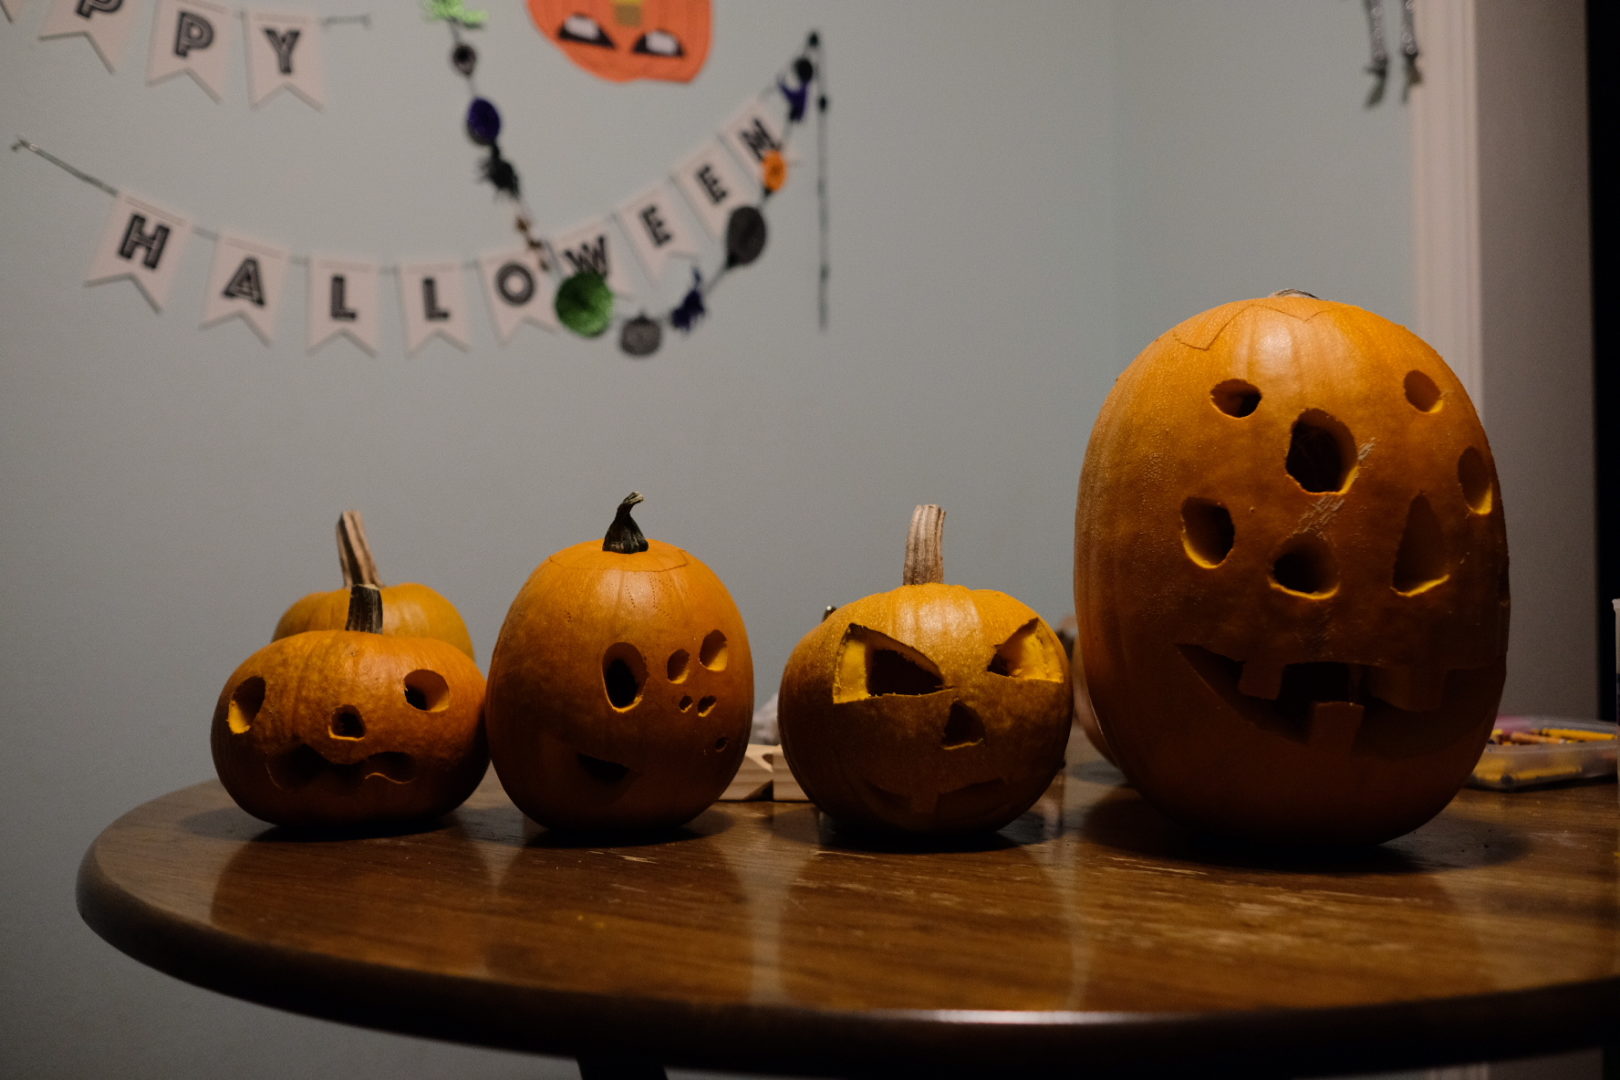 All the family pumpkins